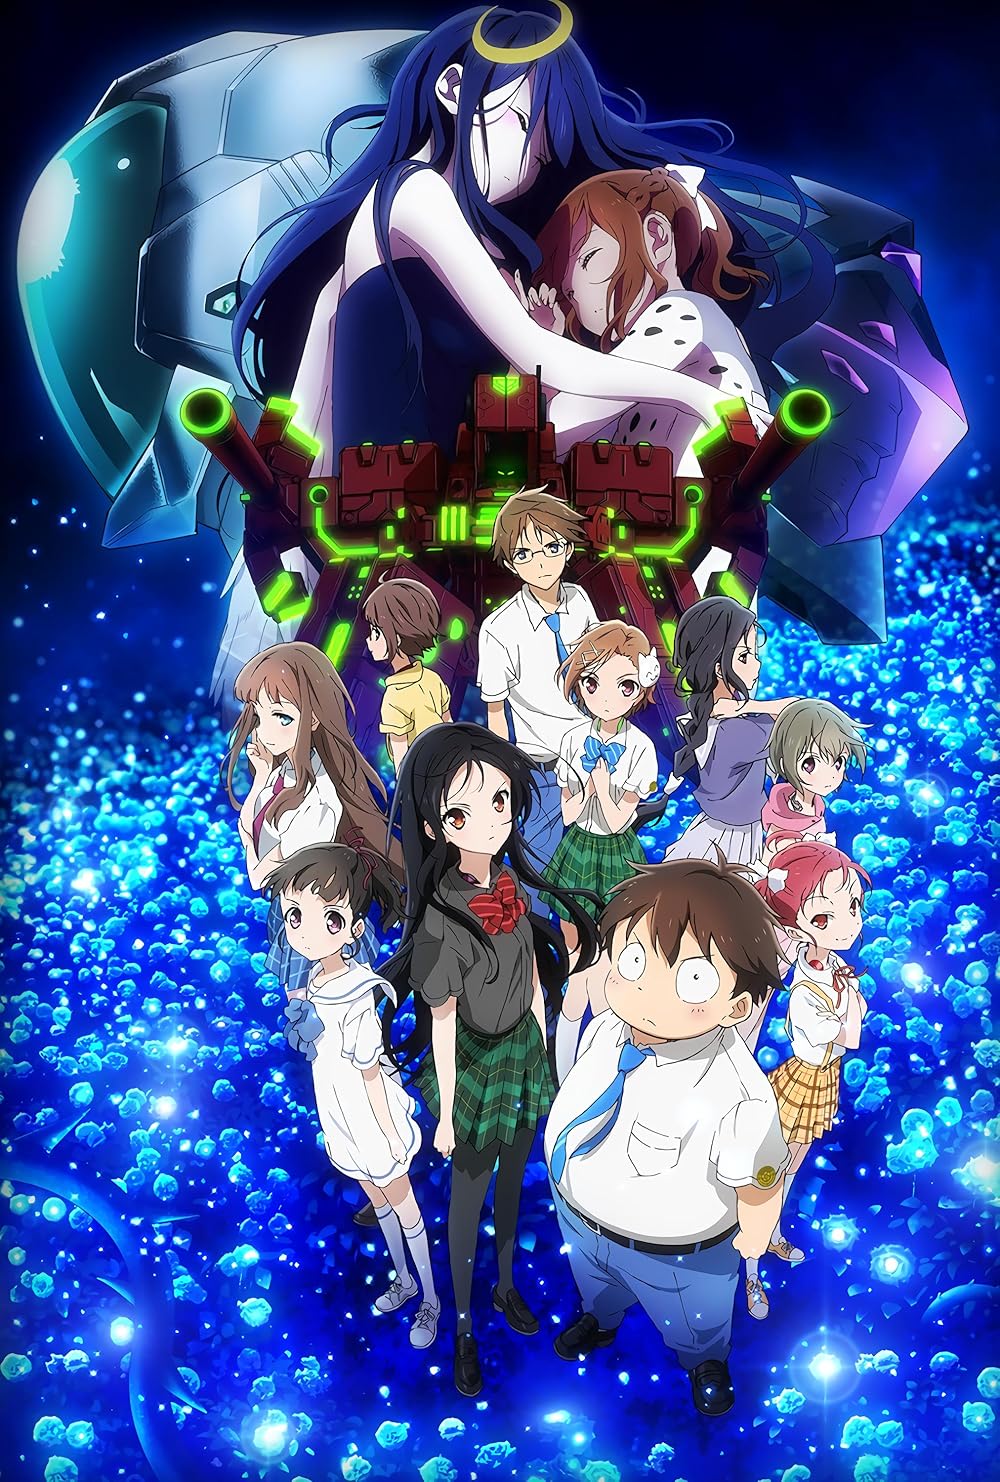 Best of Accel world ep 5